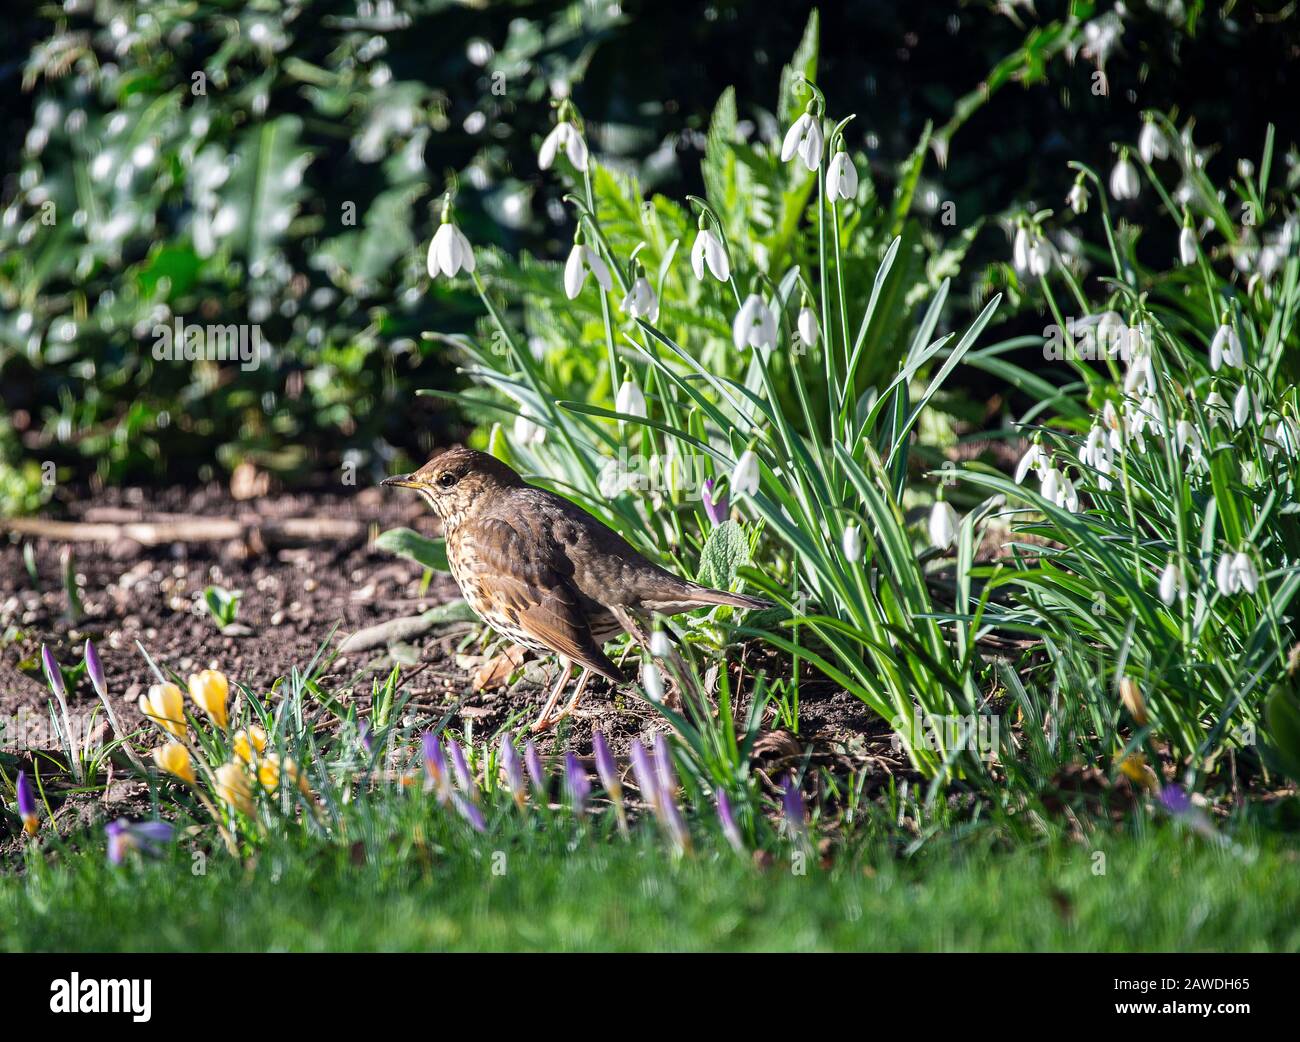 A Beautiful Song Thrush Looking for Food in a Garden in Alsager Cheshire England United Kingdom UK Stock Photo